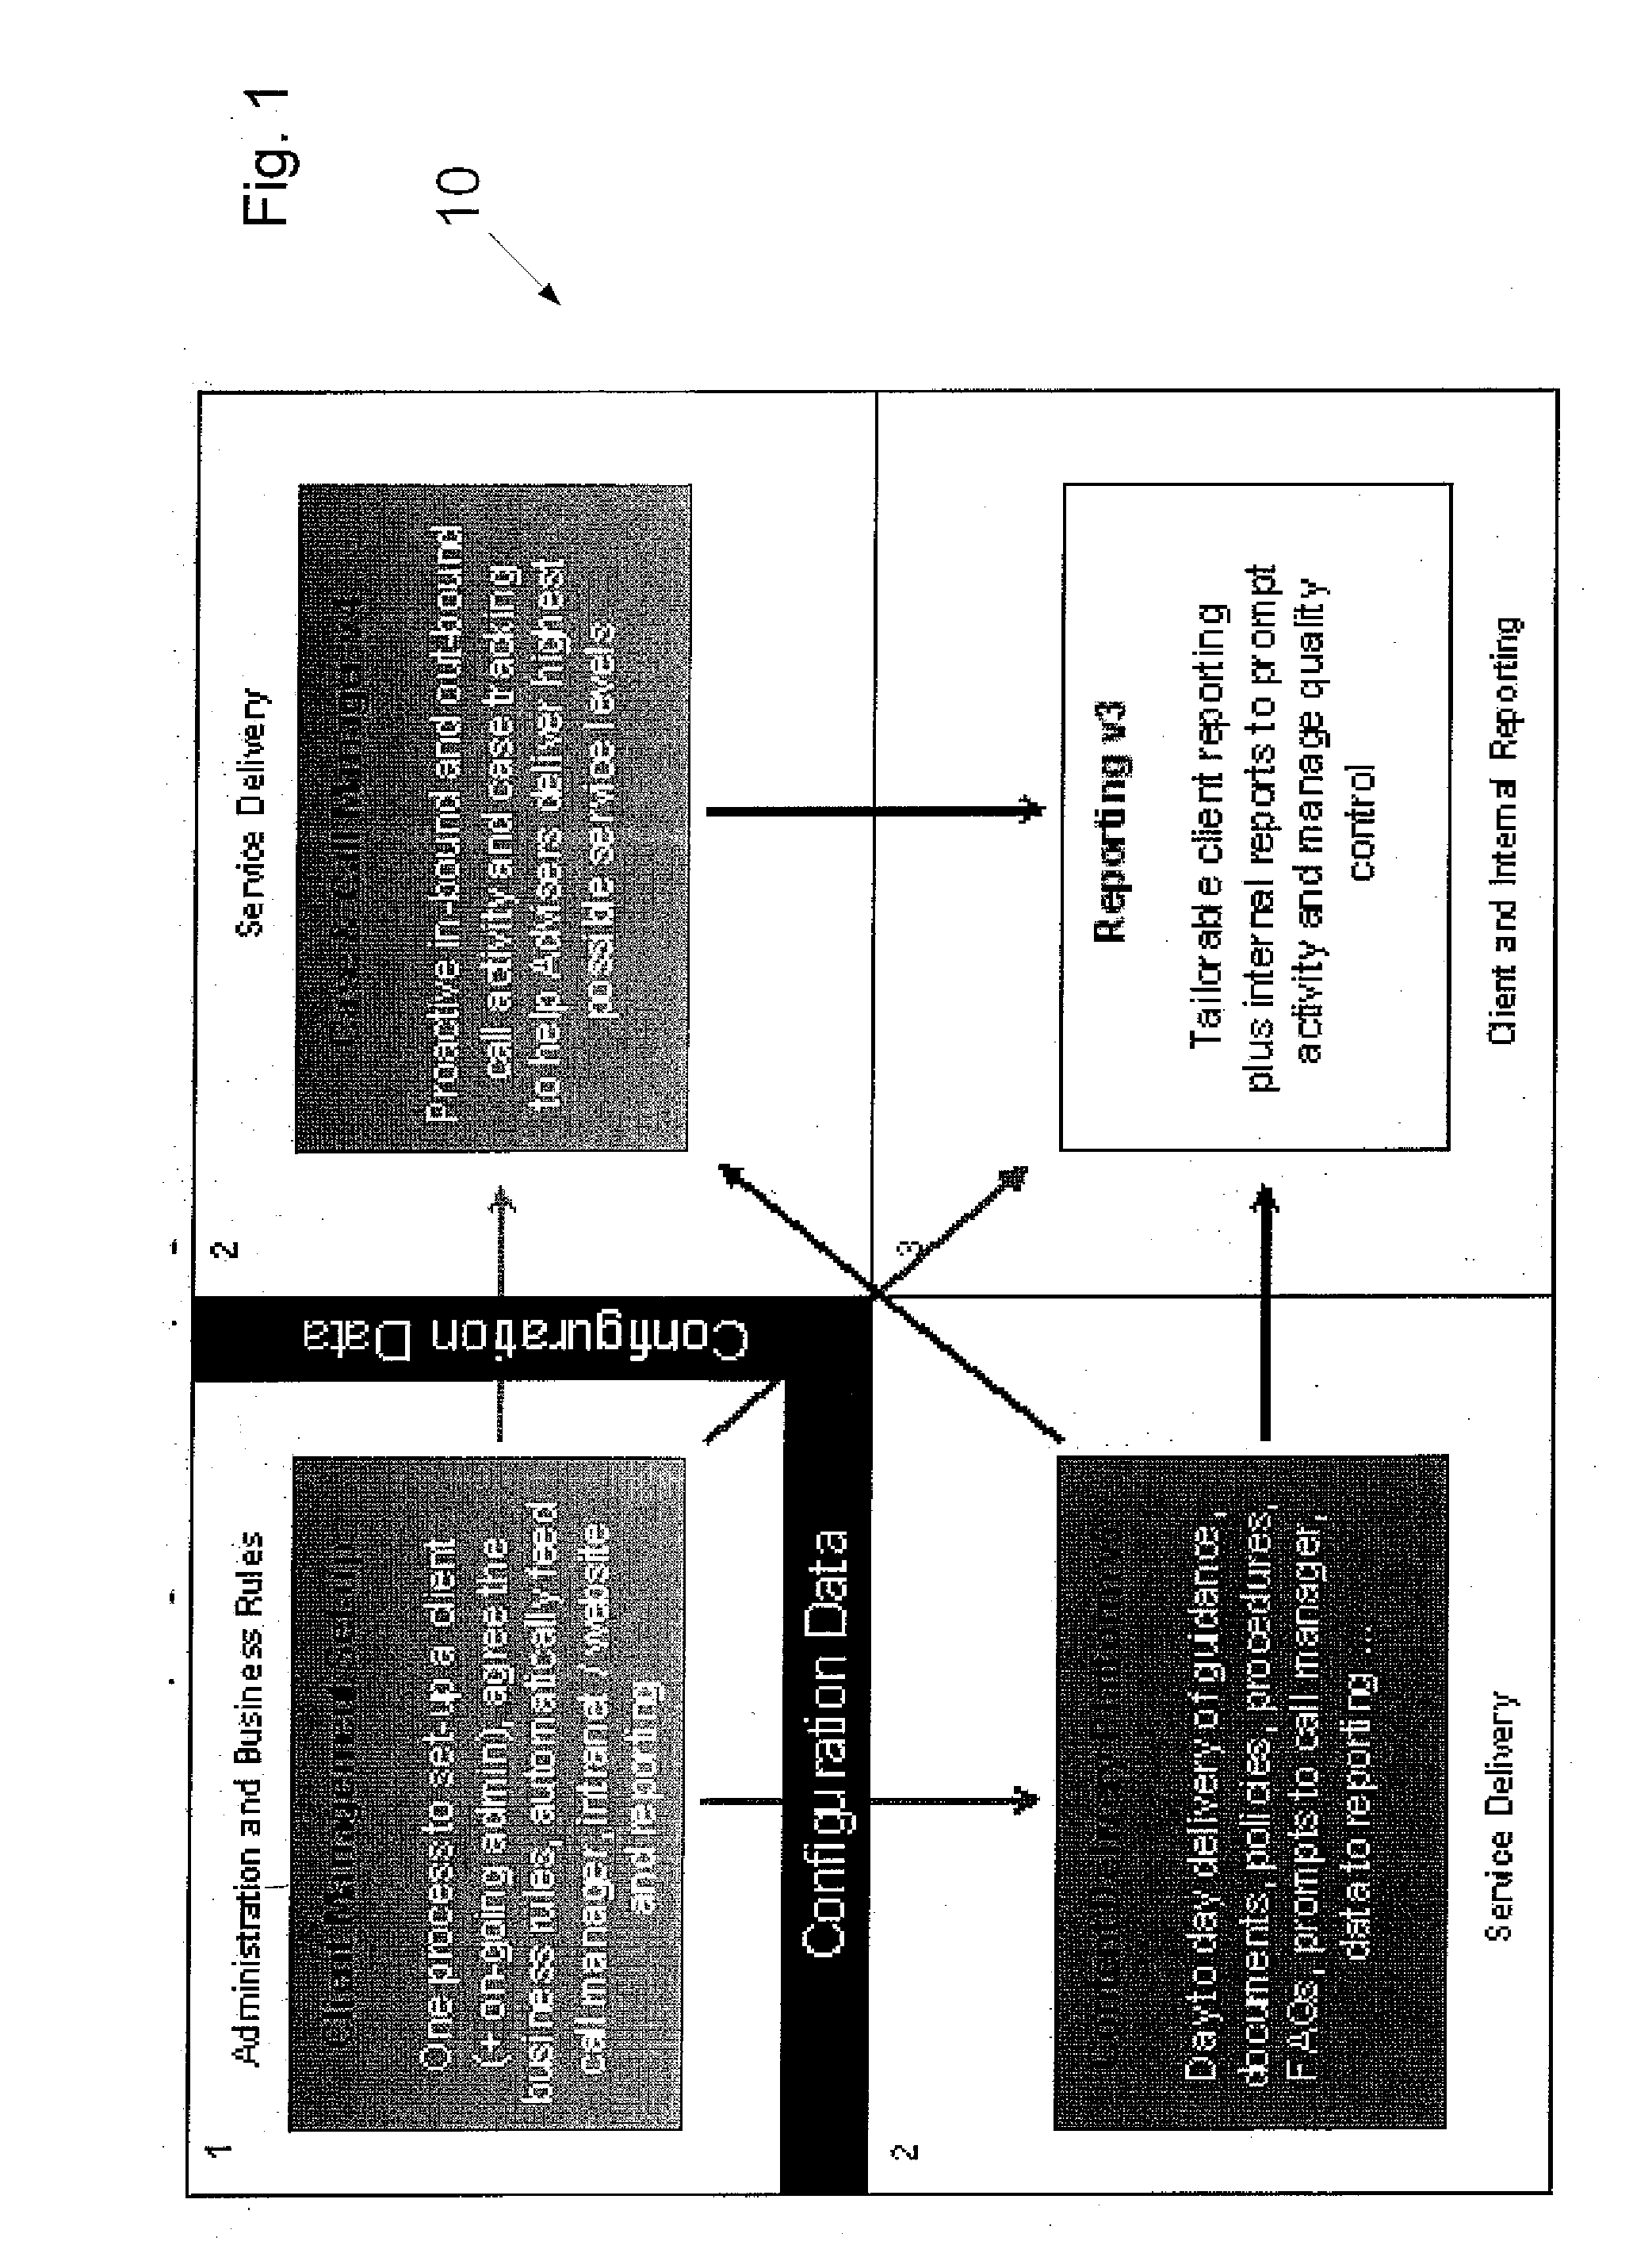 Advisory systems and methods